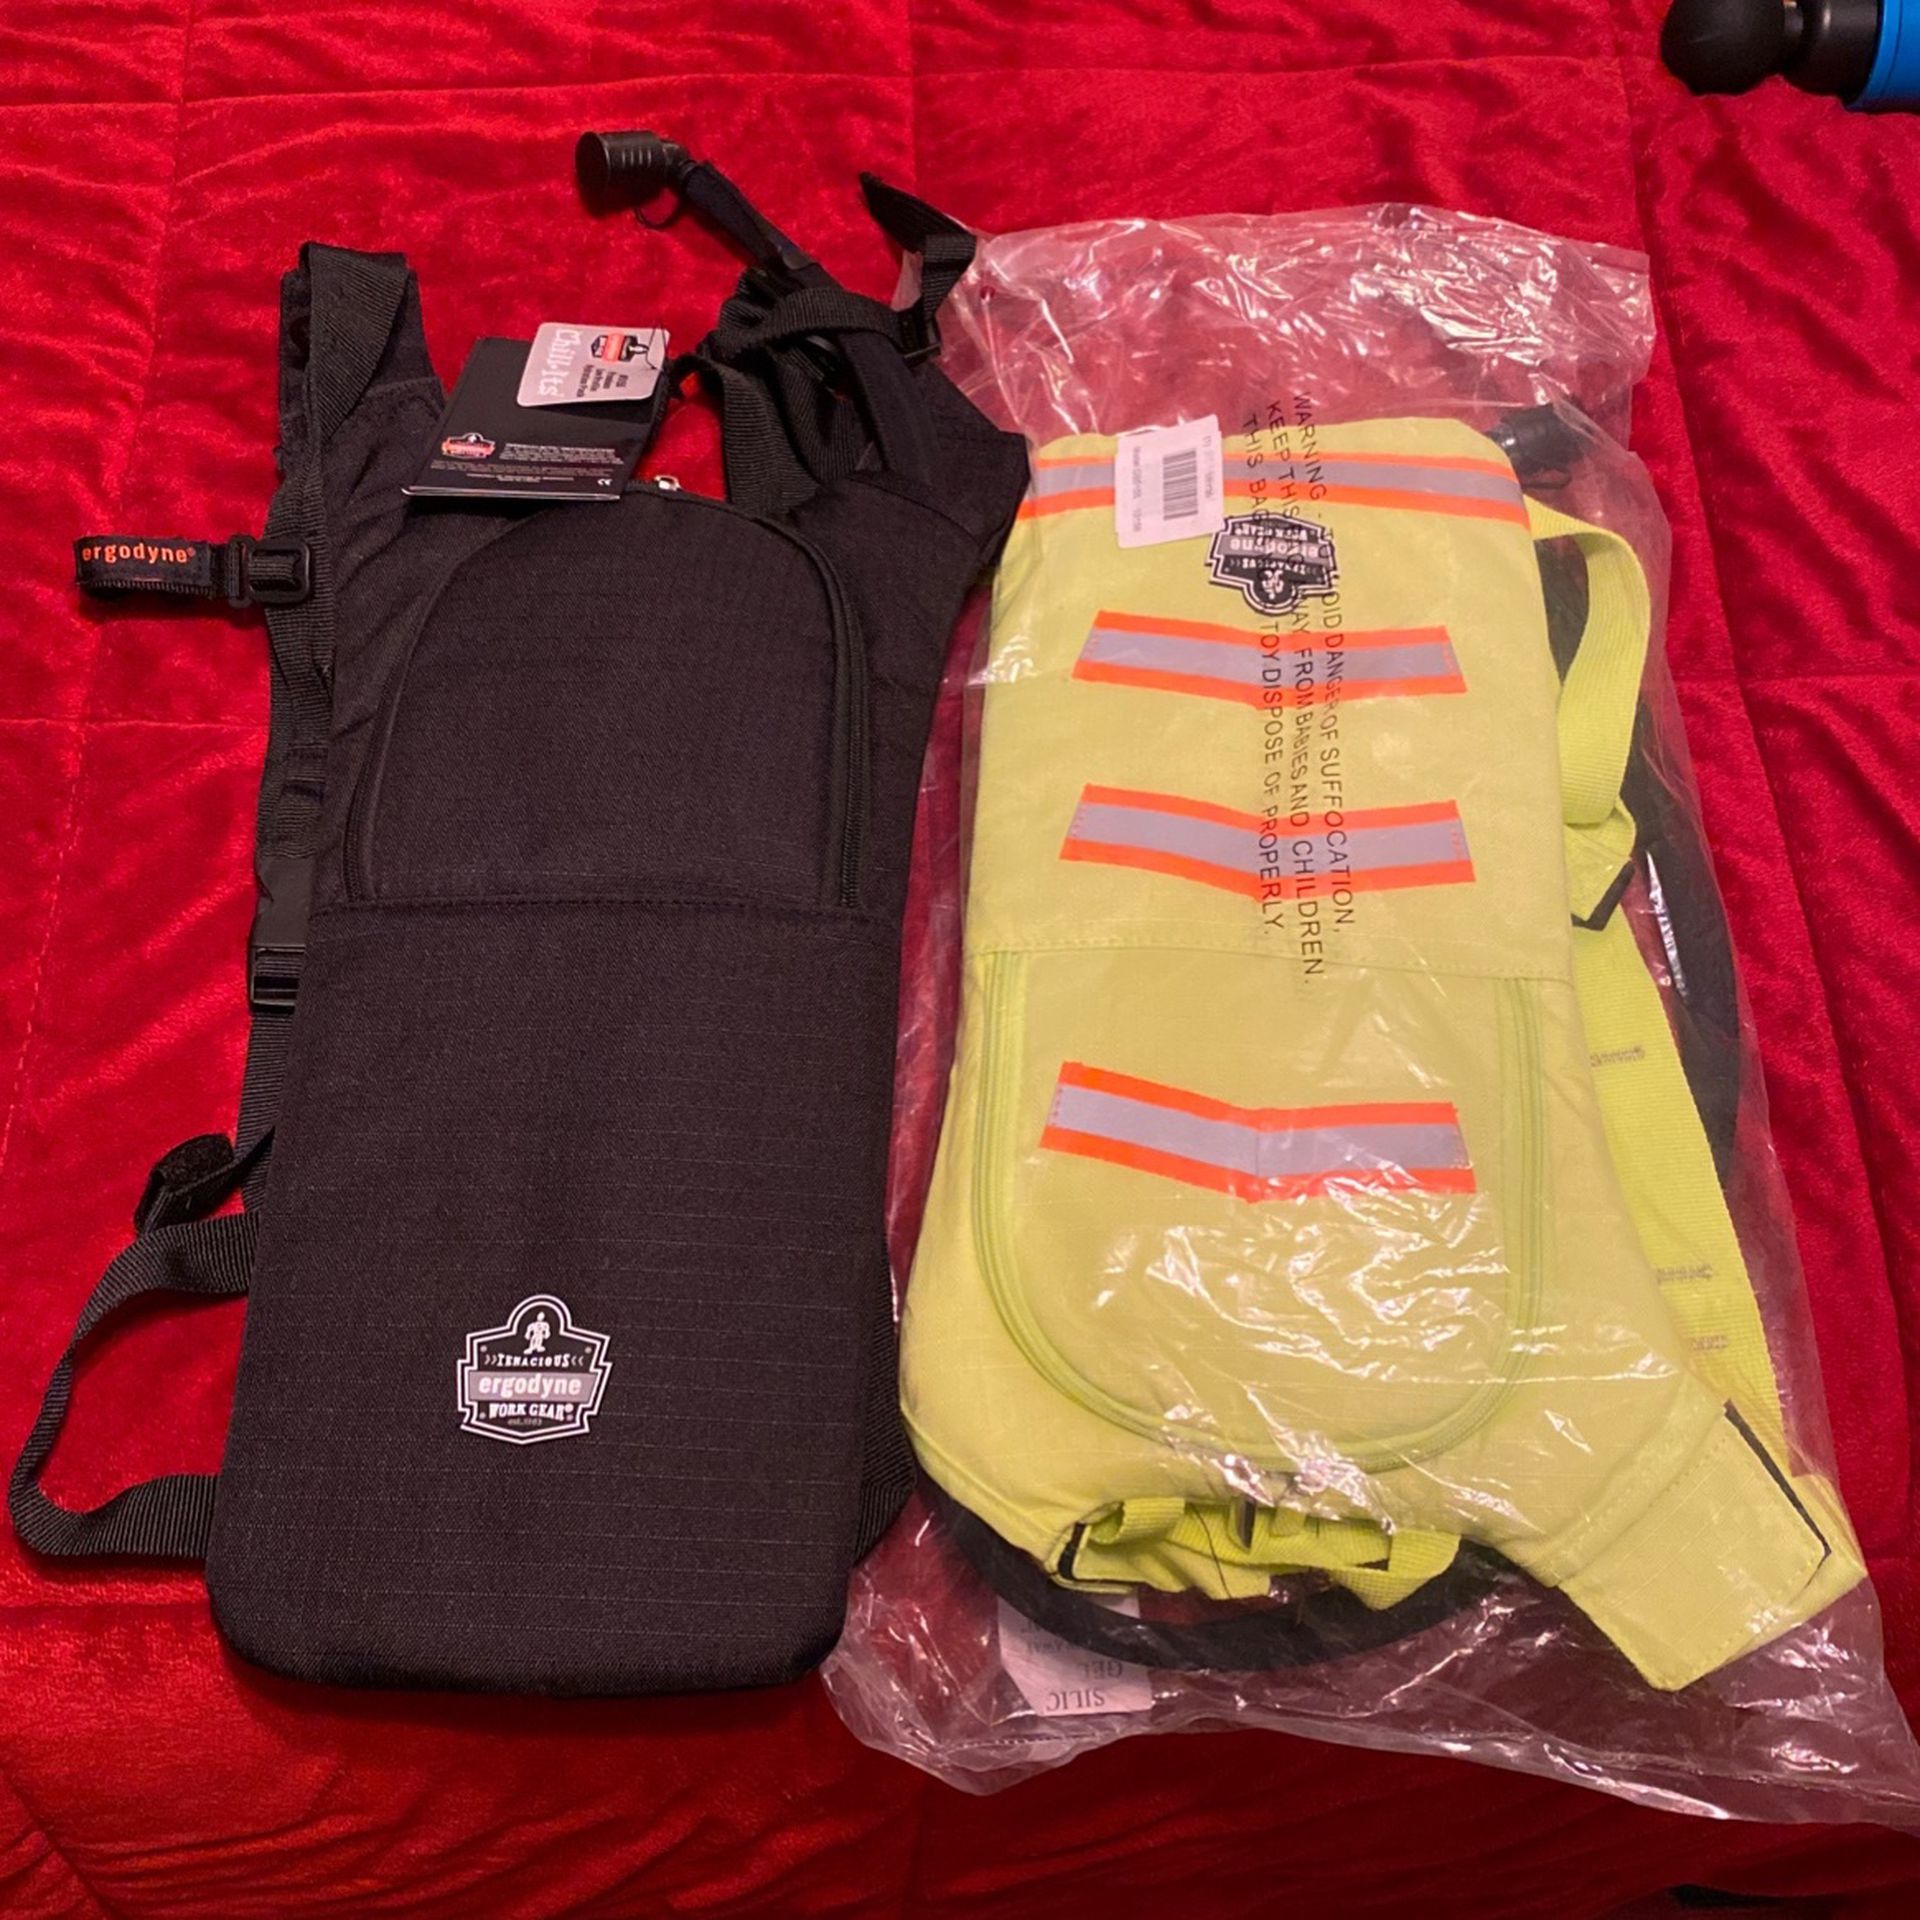 Brand New Camelbacks For Skiing, Snowmobiling, Hiking, Camping